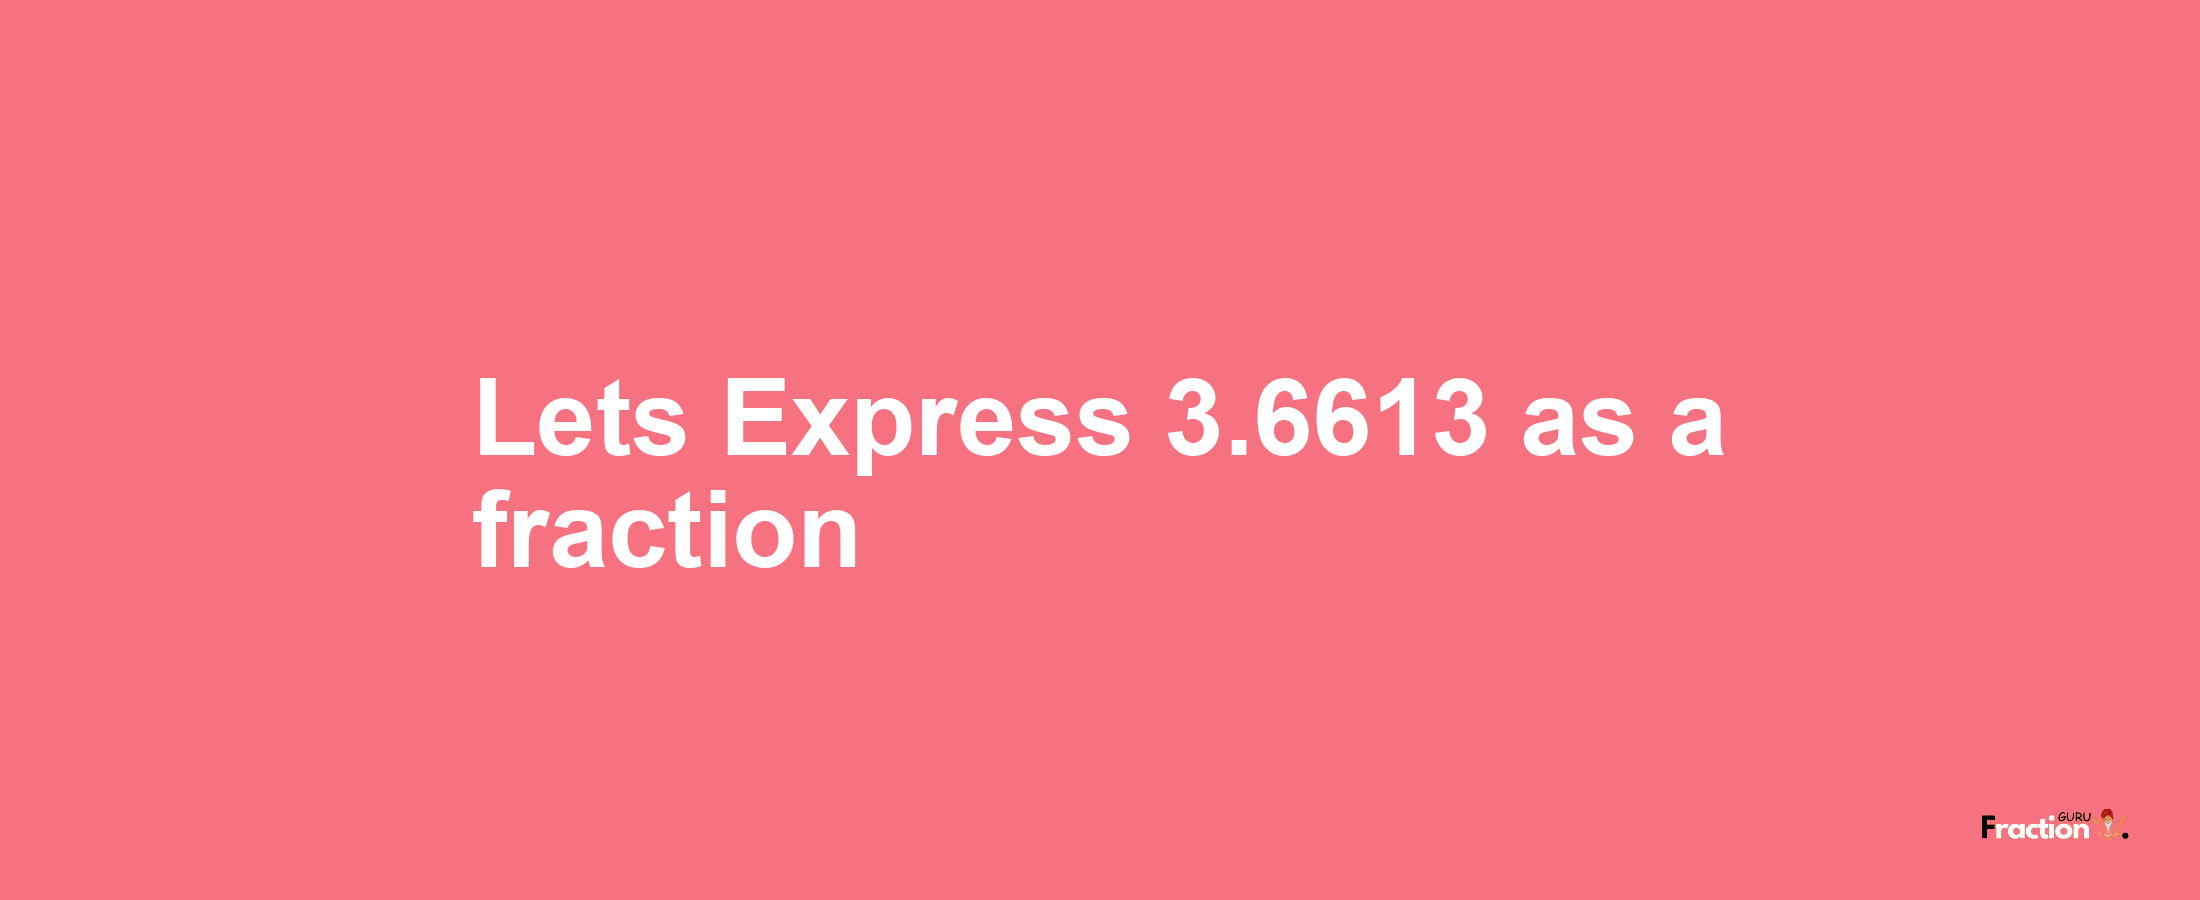 Lets Express 3.6613 as afraction